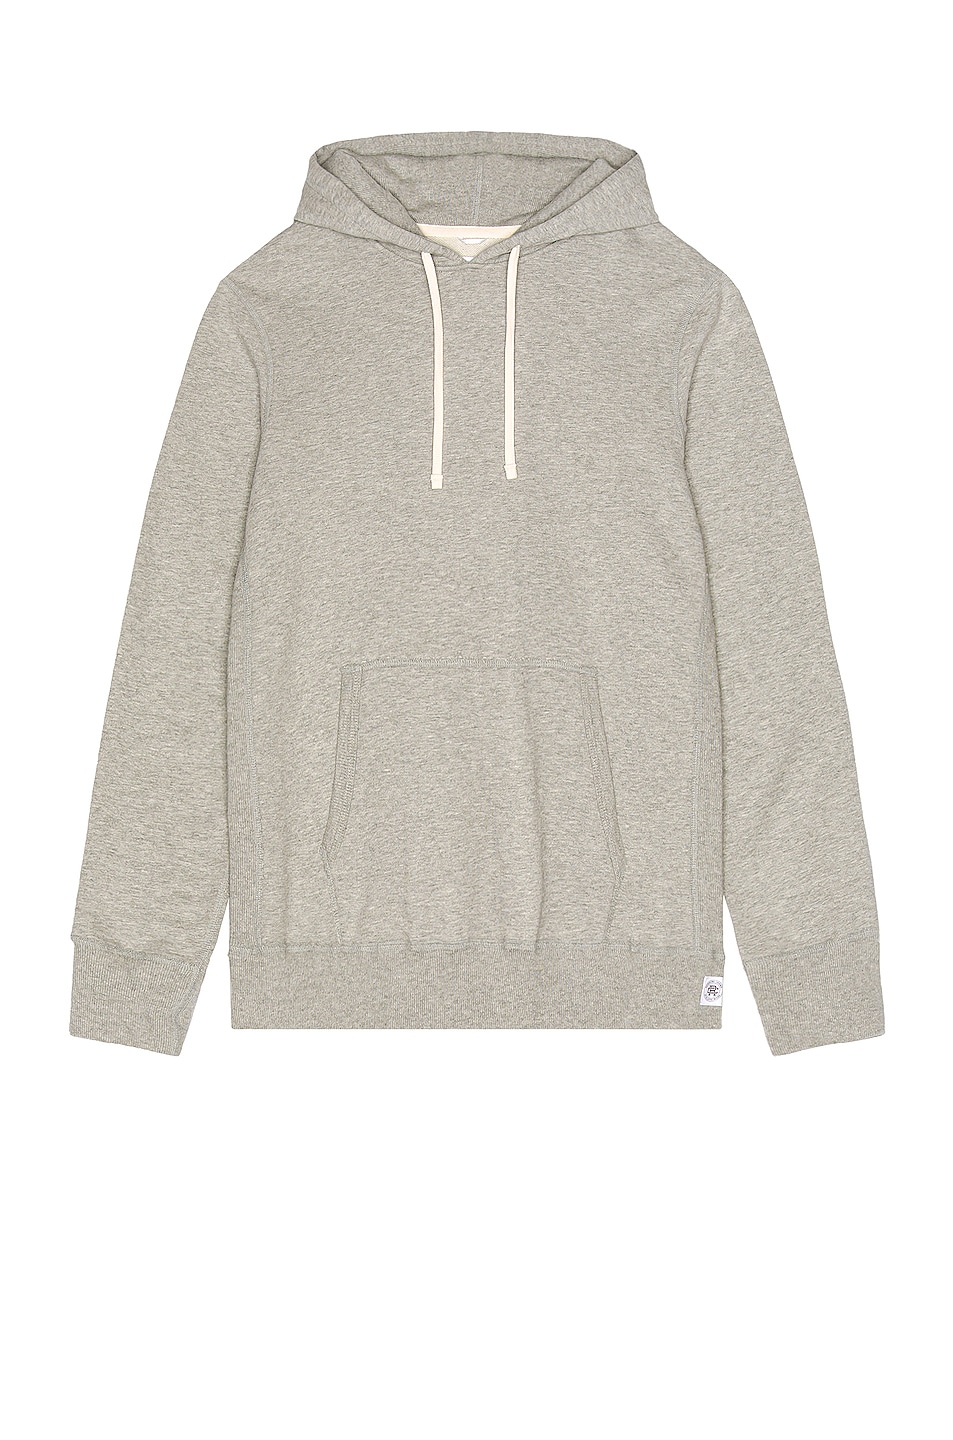 Image 1 of Reigning Champ Pullover Hoodie in Heather Grey